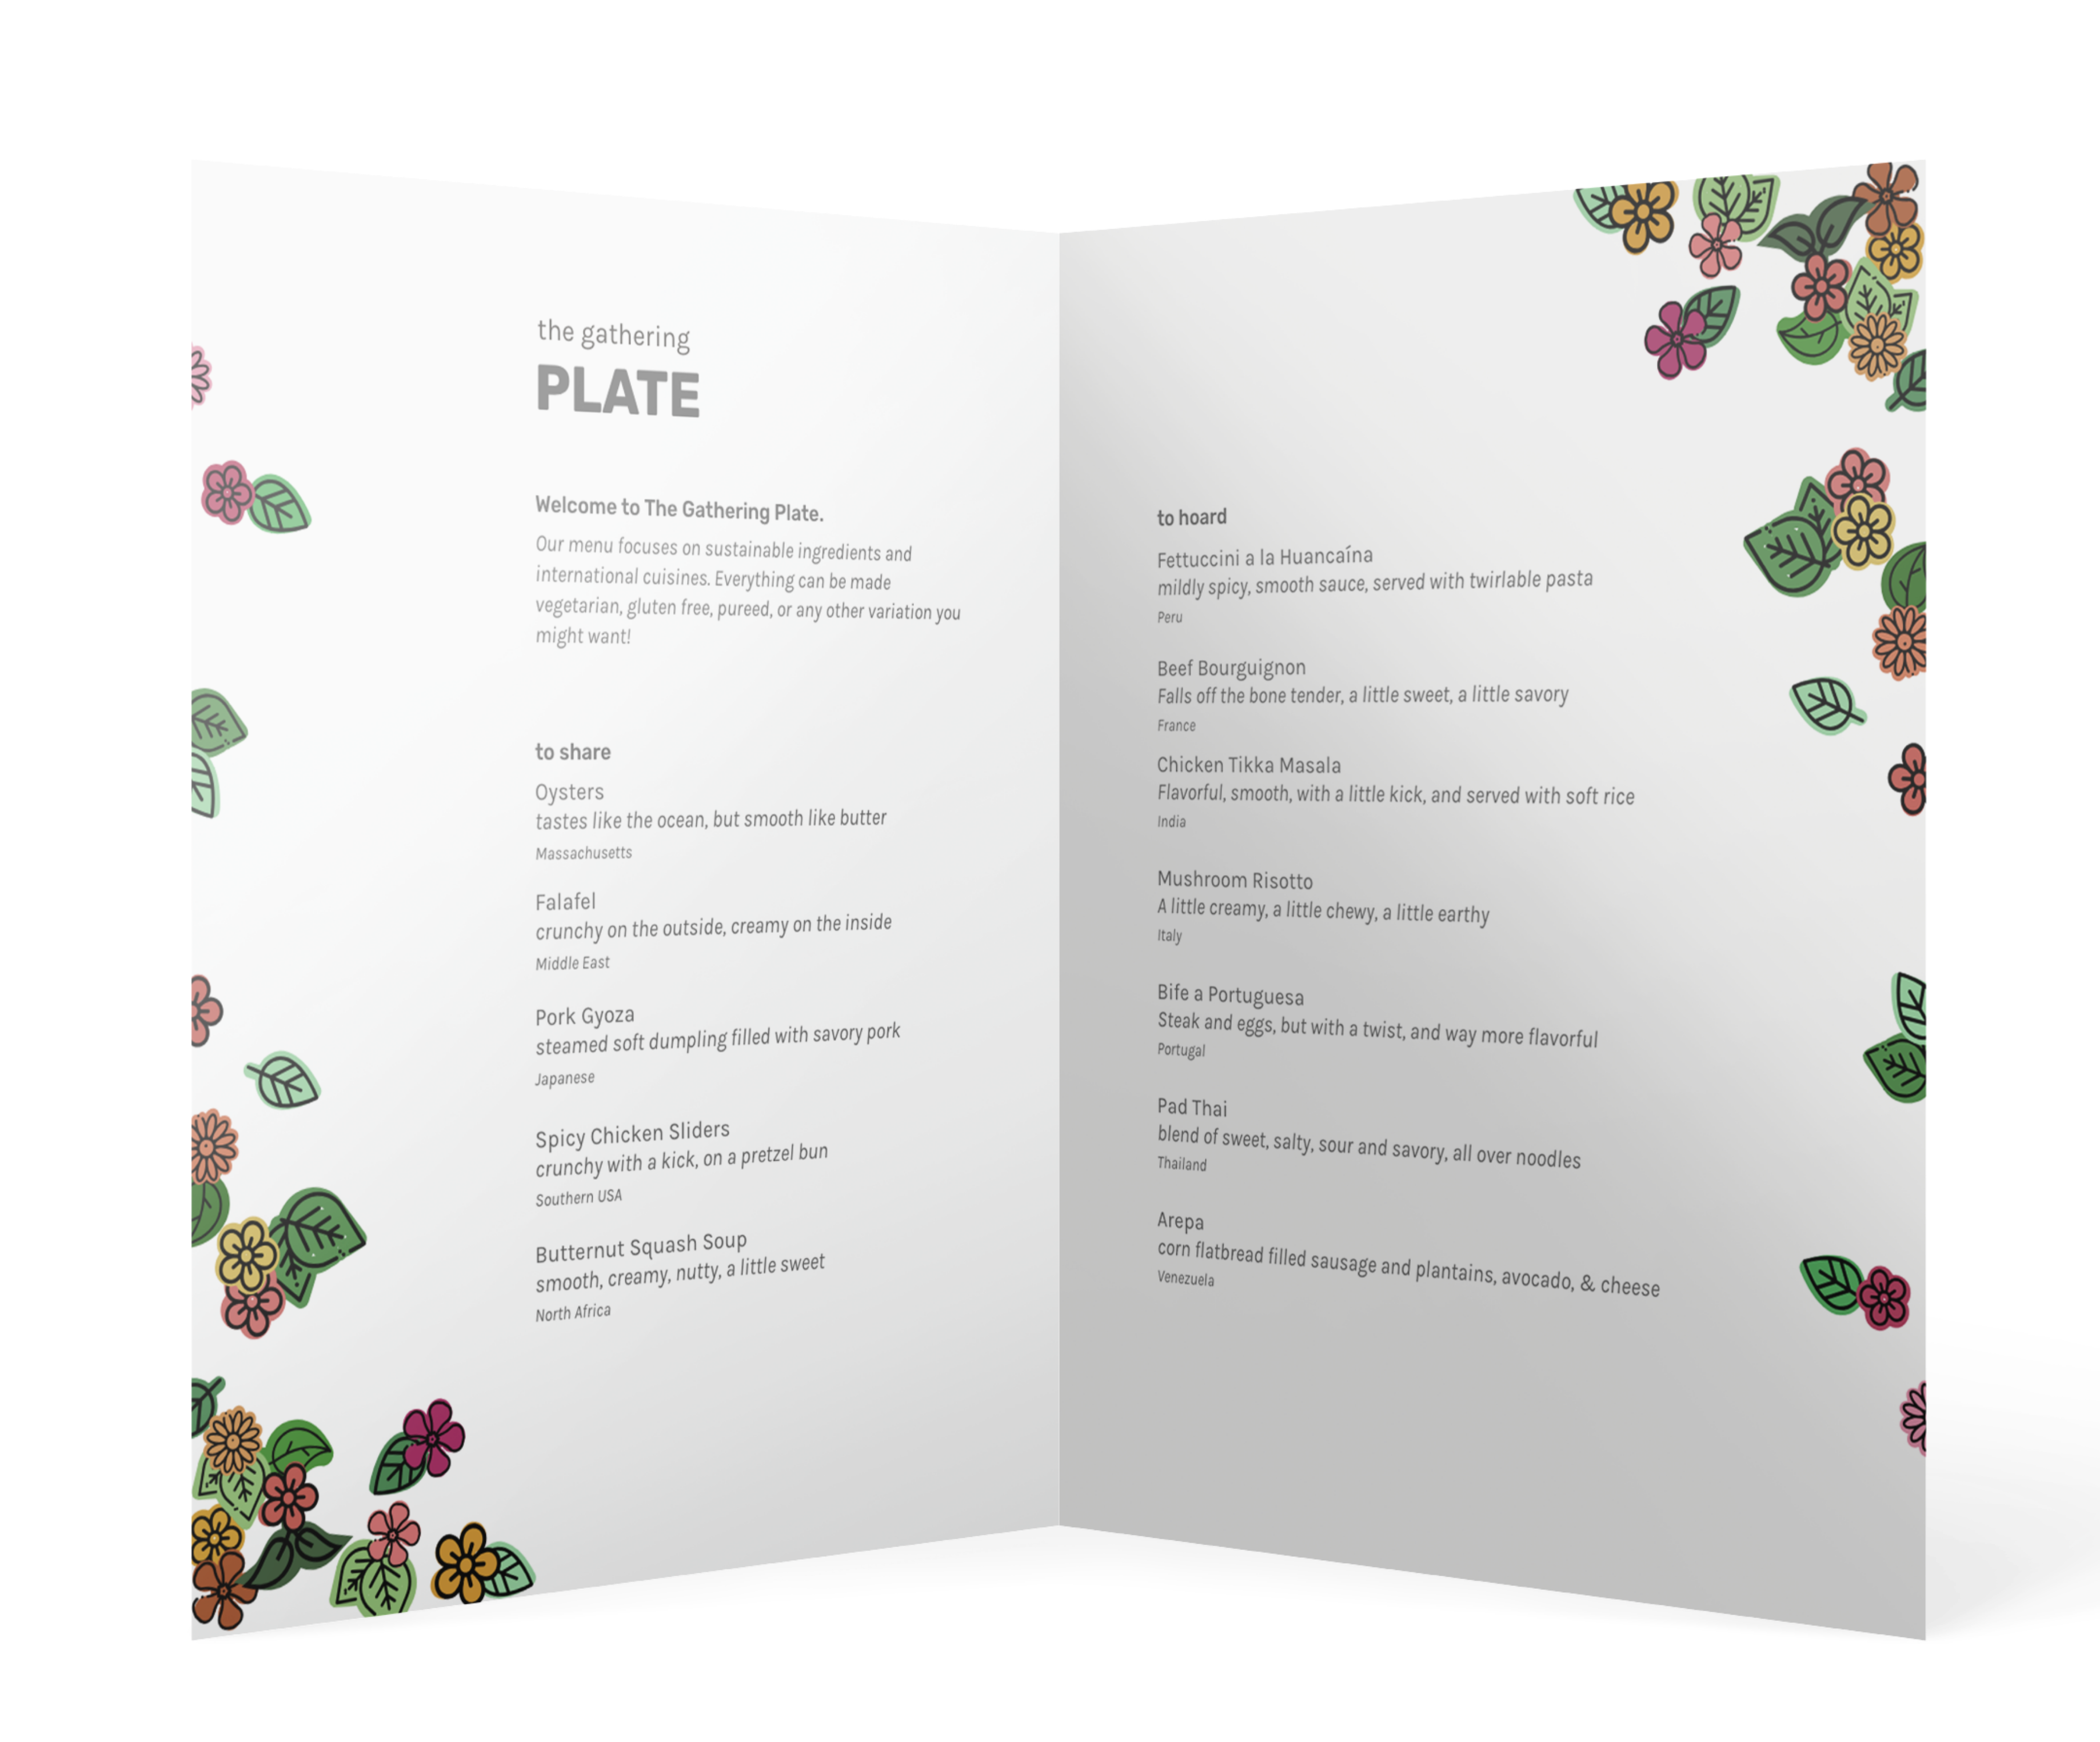 A bi-fold menu decorated with floral imagery